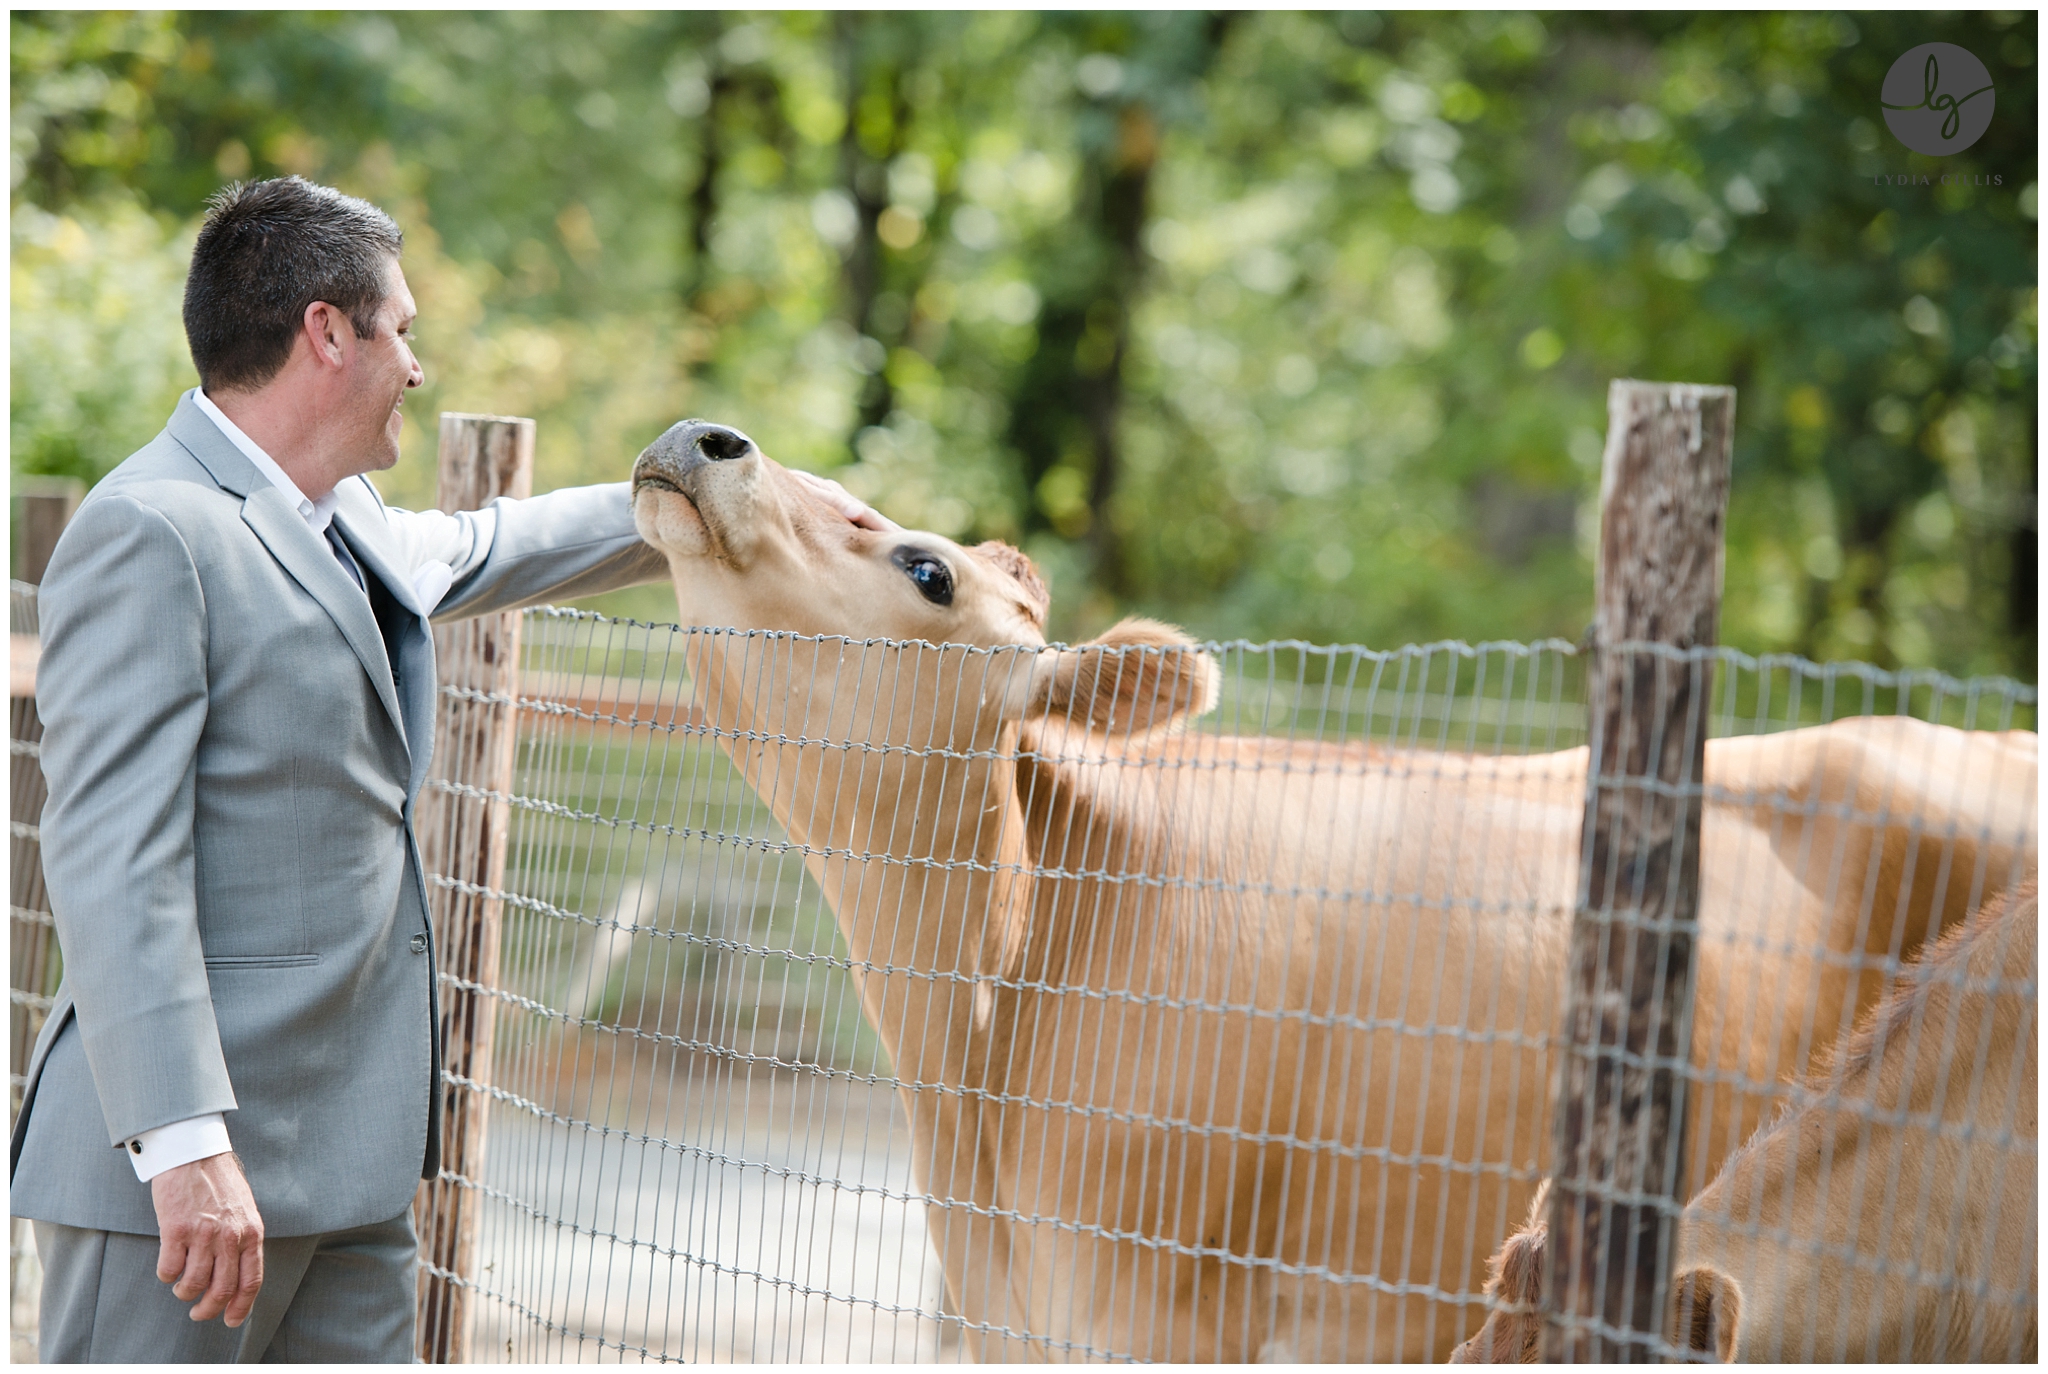 photos of groom in a gray suit with with cows in Eugene, Oregon. Photographed by Eugene wedding photography, Lydia Gillis Photography